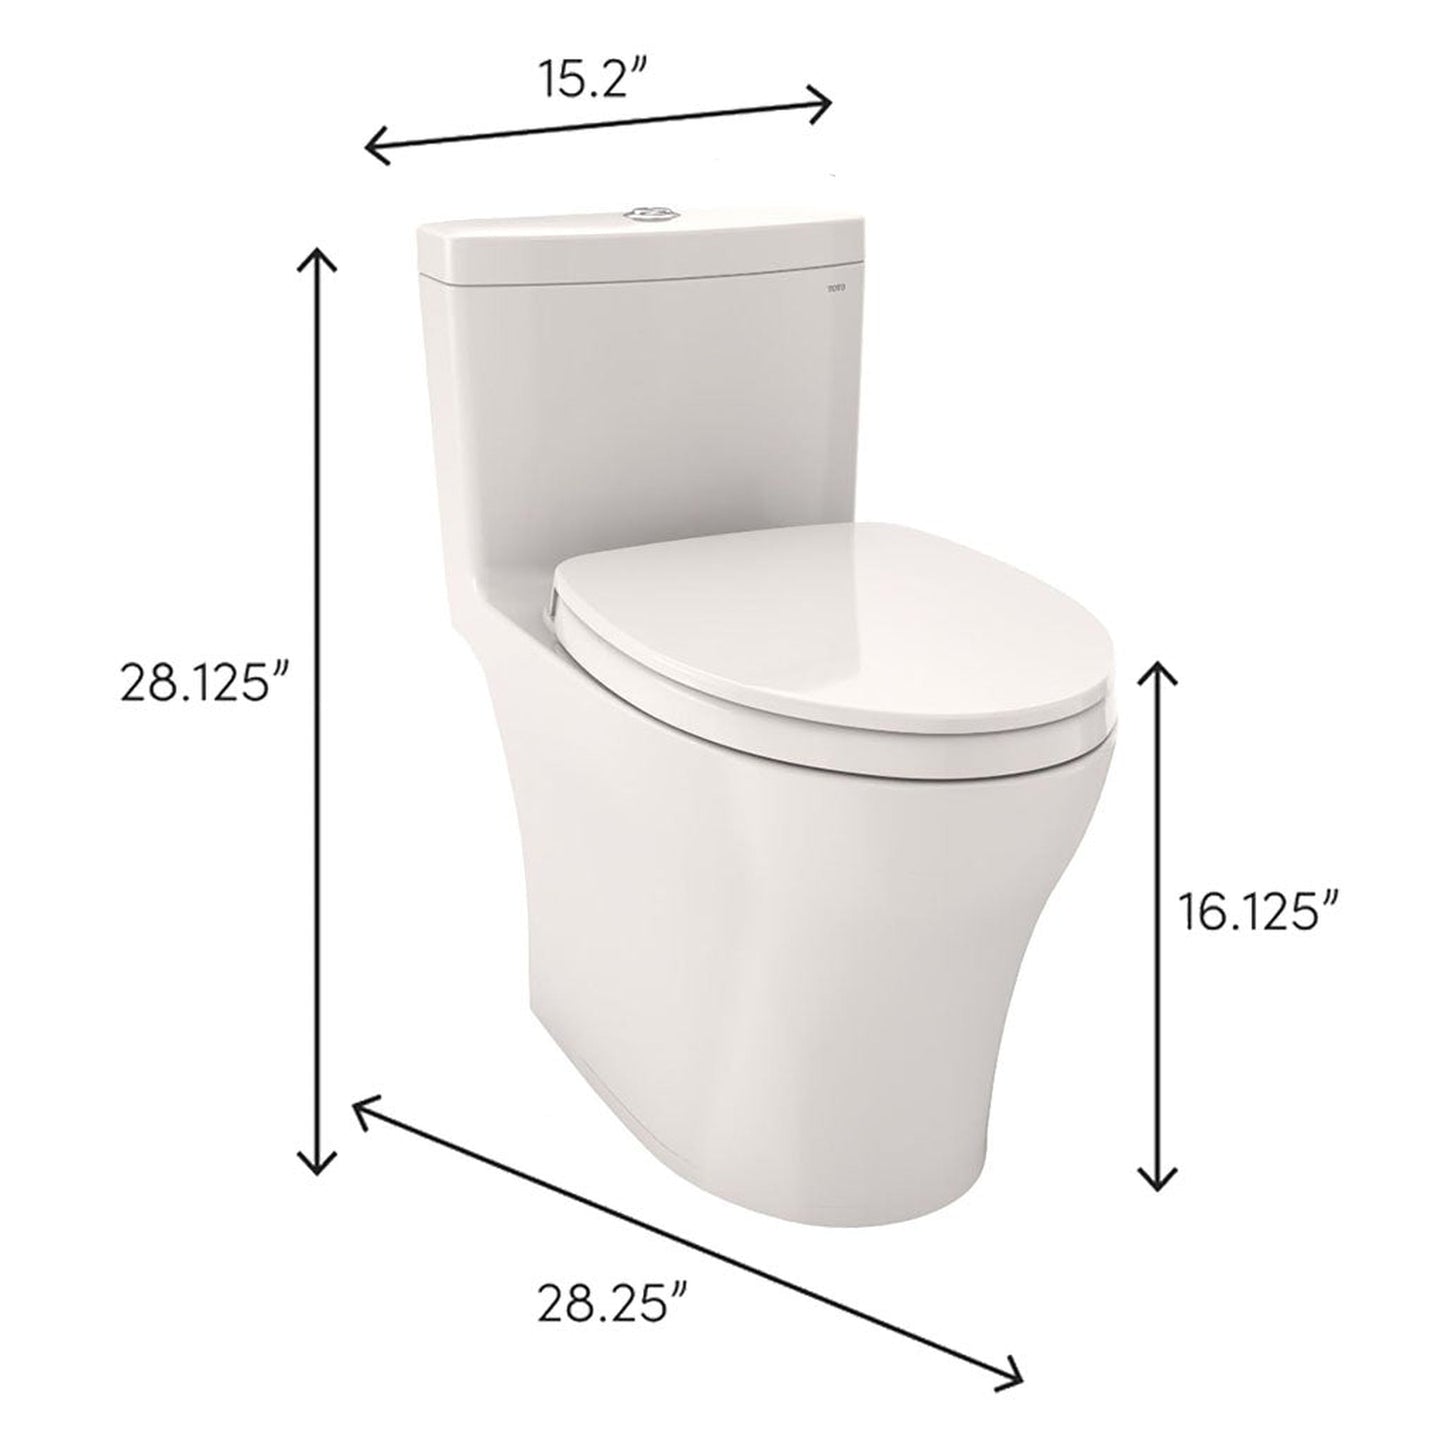 TOTO Aquia IV Colonial White One-Piece 0.8 GPF & 1.0 GPF Dual-Flush Elongated Toilet With WASHLET+ Connection - Seat Included